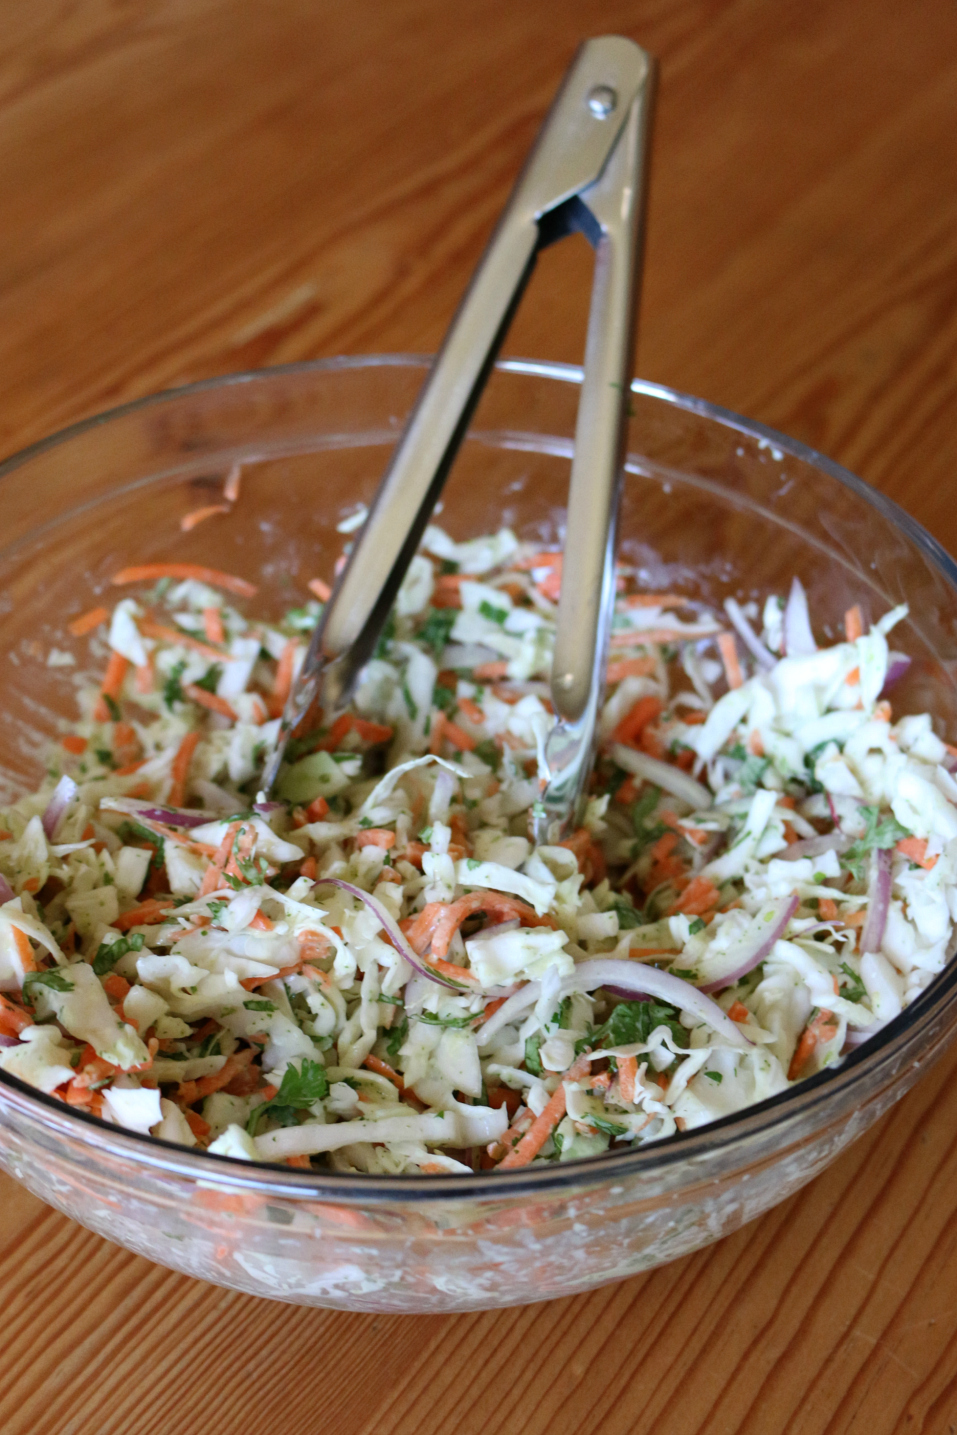 Spicy Coleslaw with Green Chile Ranch Dressing CeceliasGoodStuff.com Good Food for Good People IMG_2059